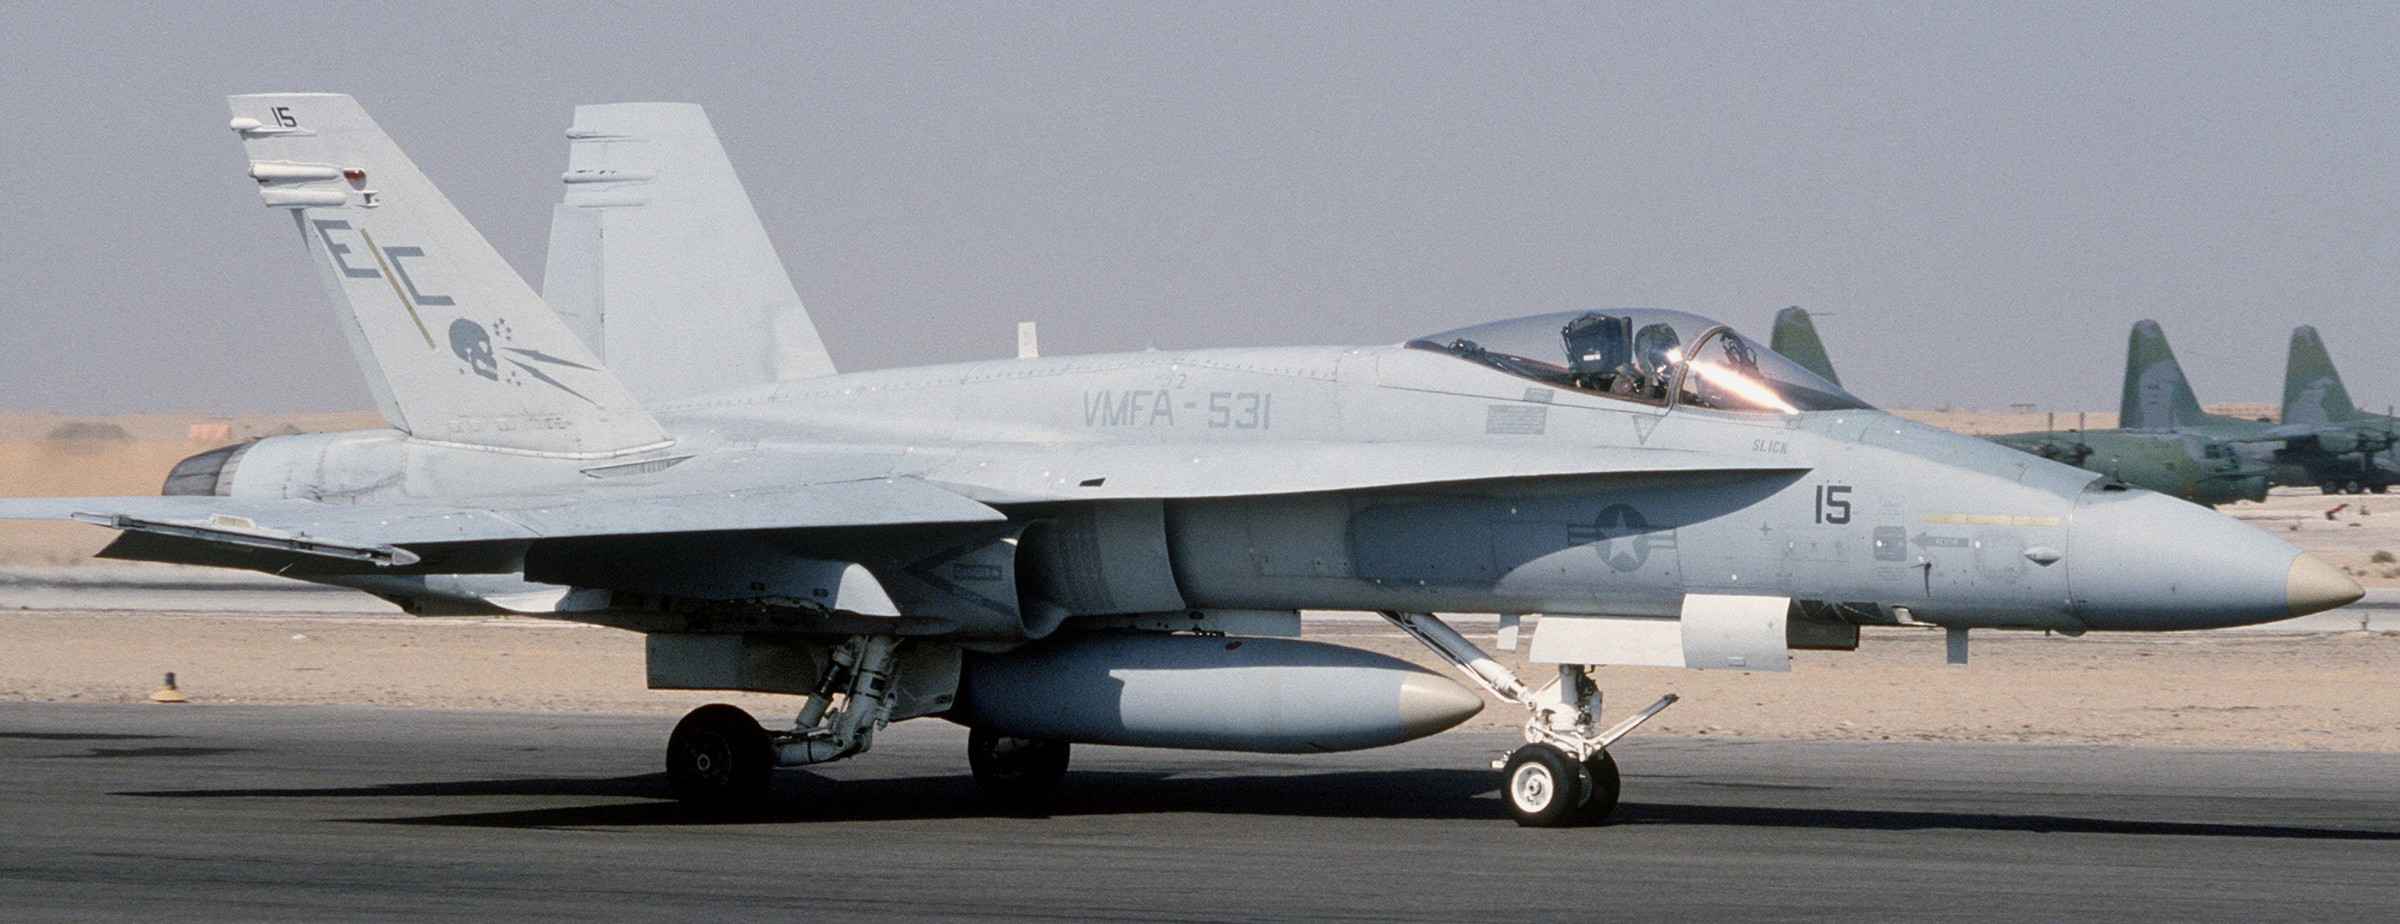 vmfa-531 grey ghosts marine fighter attack squadron f/a-18a hornet usmc 14 exercise bright star 1985